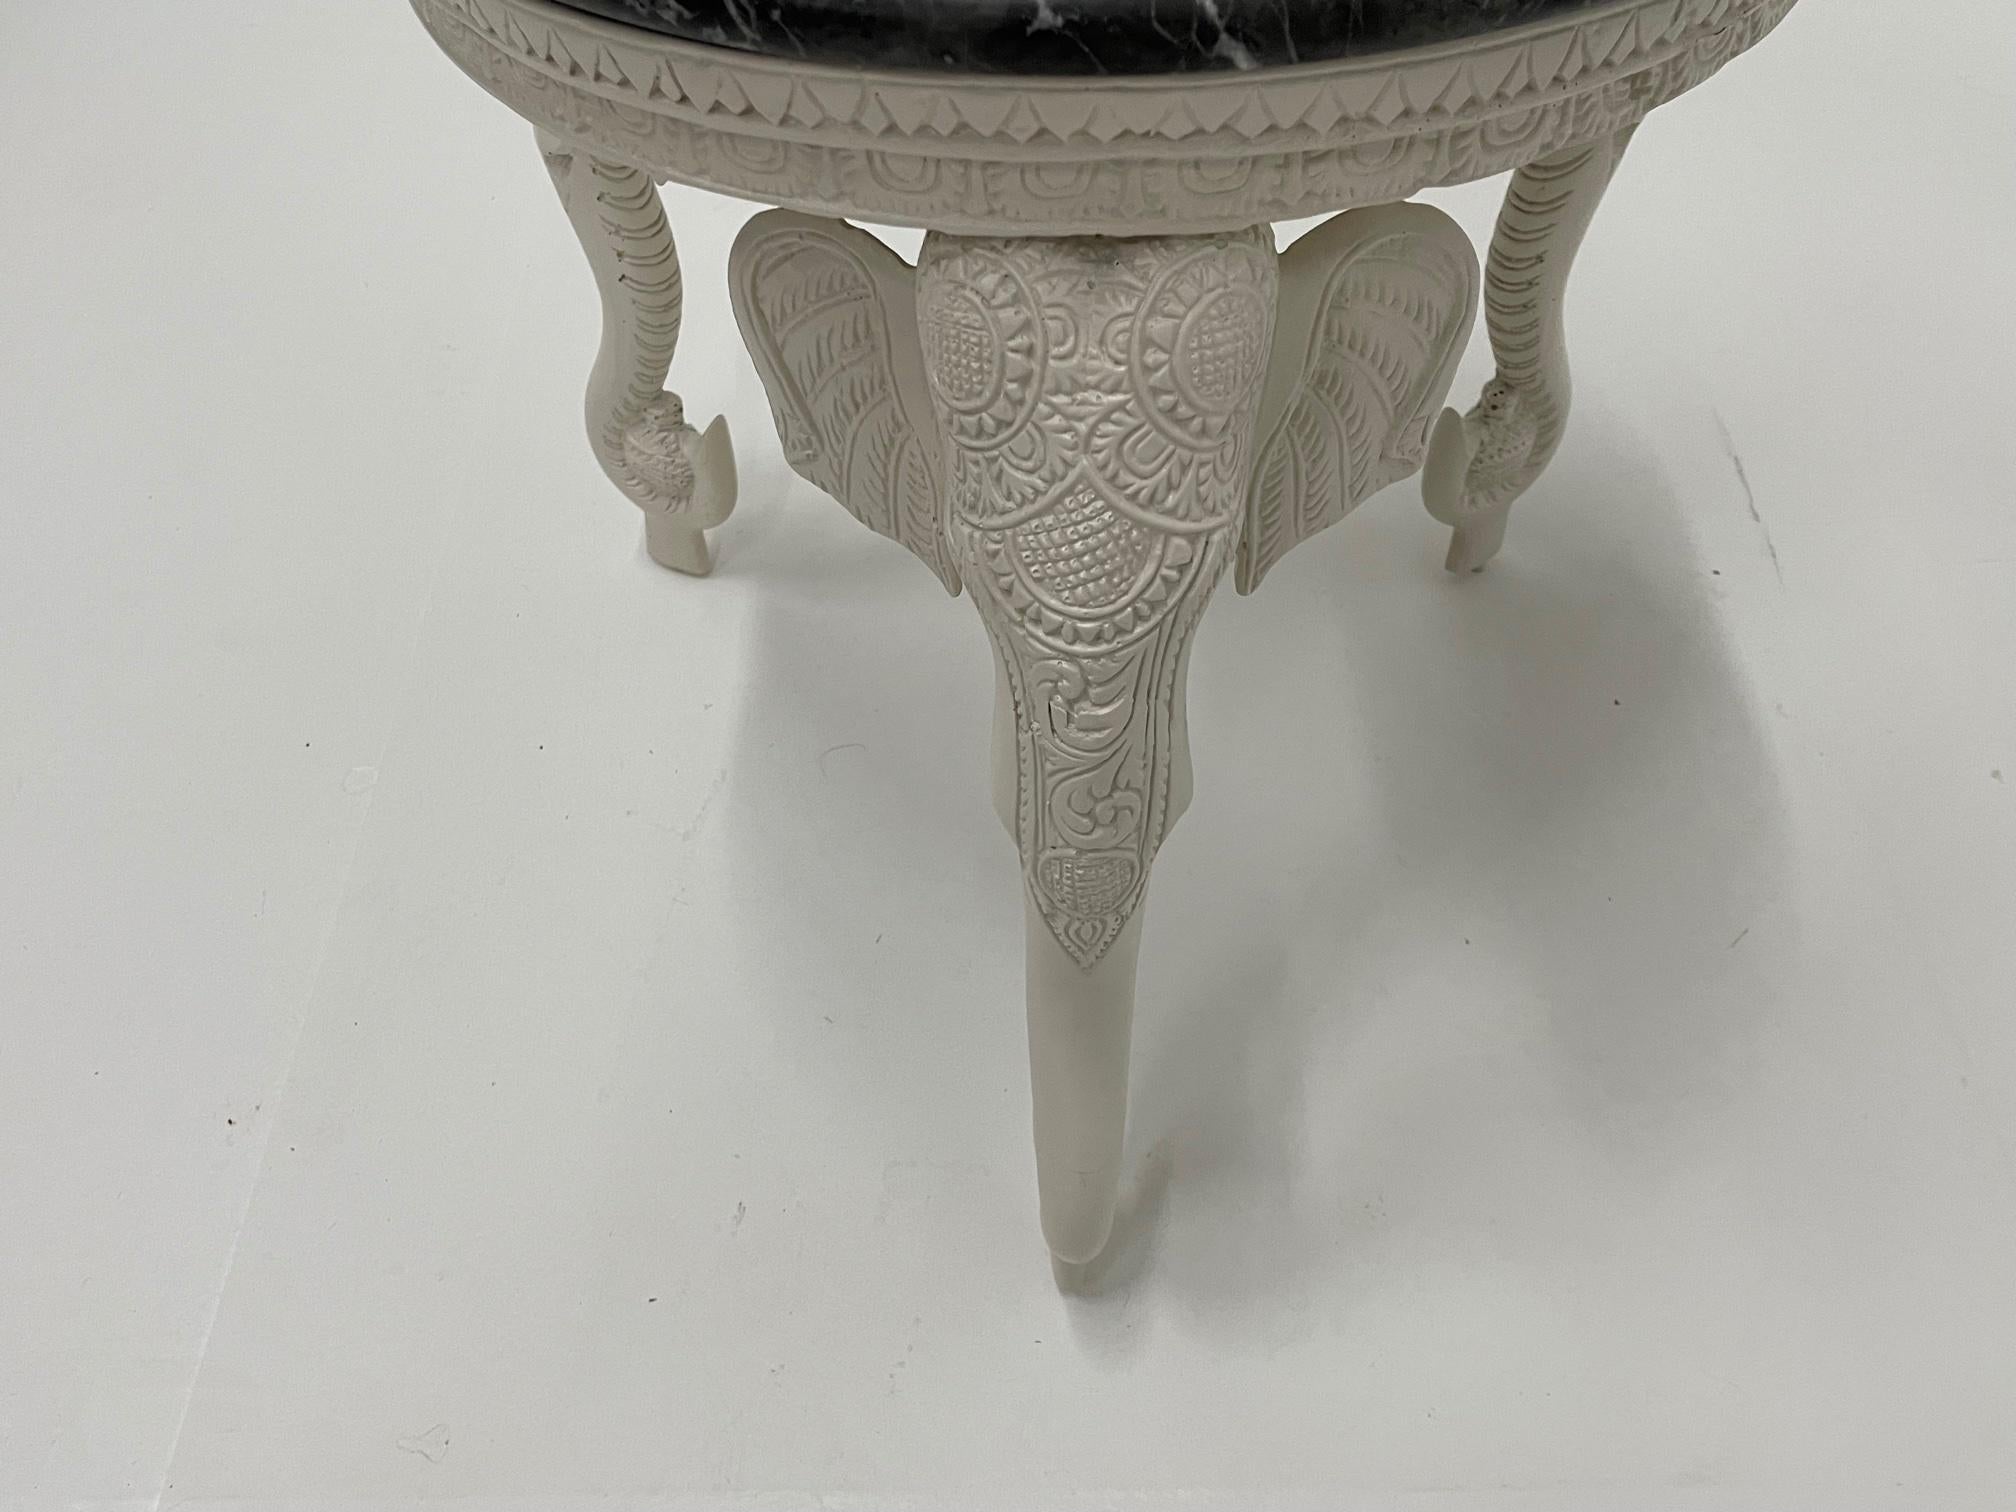 North American Glamorous Cream Colored Cast Resin Elephant Motife Round Table with Marble Top